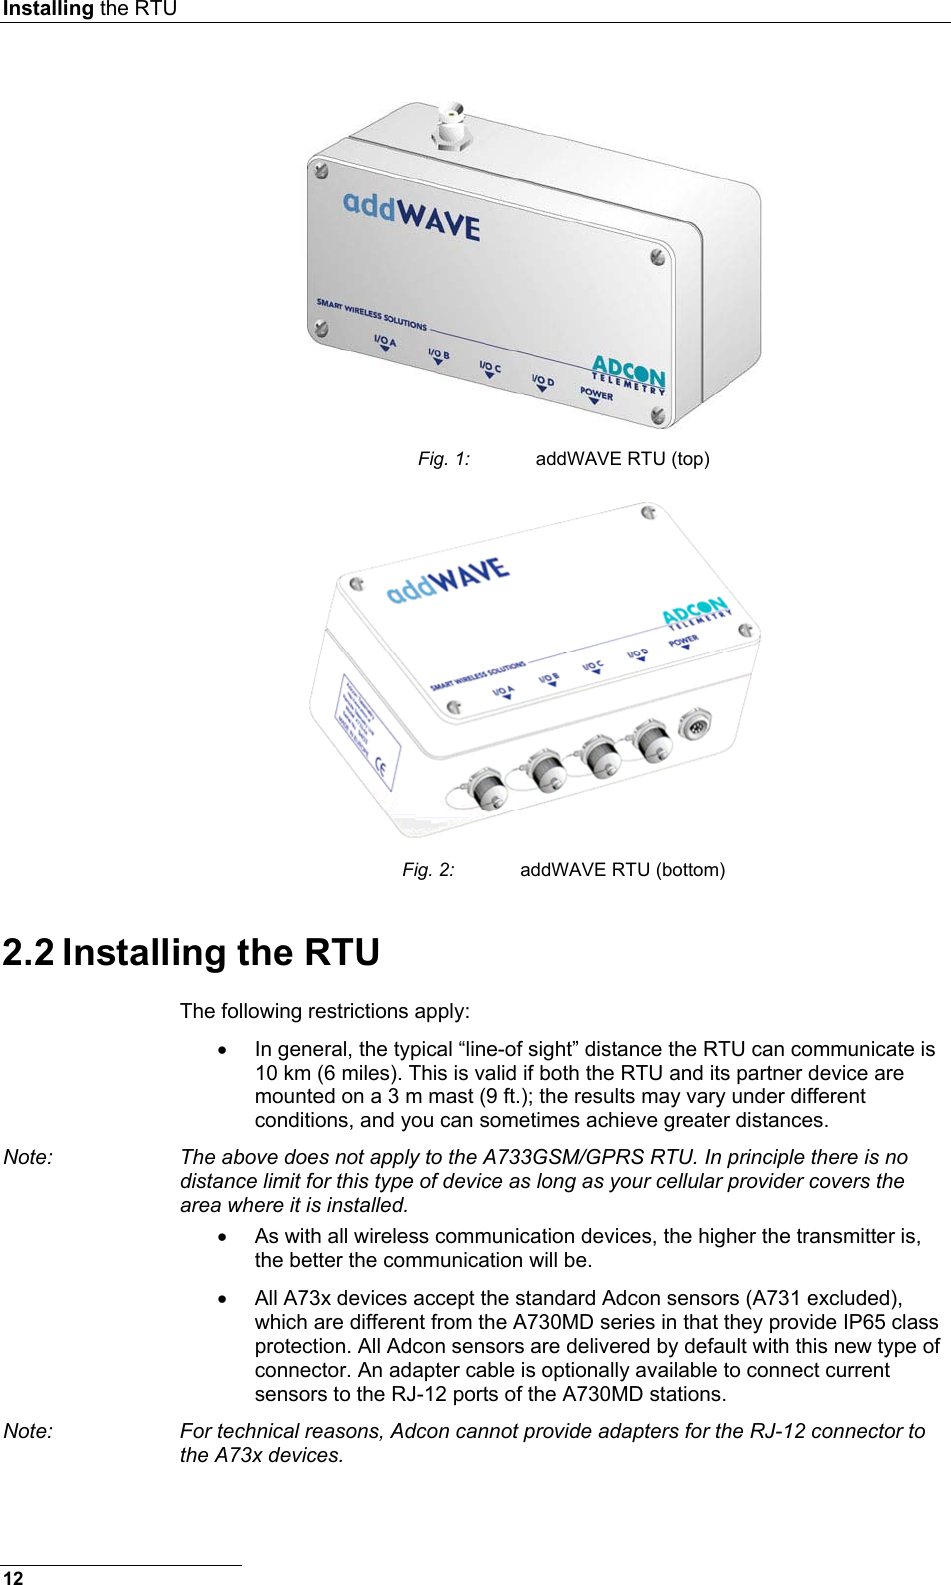 Installing the RTU   Fig. 1:  addWAVE RTU (top)  Fig. 2:  addWAVE RTU (bottom) 2.2 Installing the RTU The following restrictions apply: •  In general, the typical “line-of sight” distance the RTU can communicate is 10 km (6 miles). This is valid if both the RTU and its partner device are mounted on a 3 m mast (9 ft.); the results may vary under different conditions, and you can sometimes achieve greater distances. Note:  The above does not apply to the A733GSM/GPRS RTU. In principle there is no distance limit for this type of device as long as your cellular provider covers the area where it is installed. •  As with all wireless communication devices, the higher the transmitter is, the better the communication will be. •  All A73x devices accept the standard Adcon sensors (A731 excluded), which are different from the A730MD series in that they provide IP65 class protection. All Adcon sensors are delivered by default with this new type of connector. An adapter cable is optionally available to connect current sensors to the RJ-12 ports of the A730MD stations. Note:  For technical reasons, Adcon cannot provide adapters for the RJ-12 connector to the A73x devices. 12 